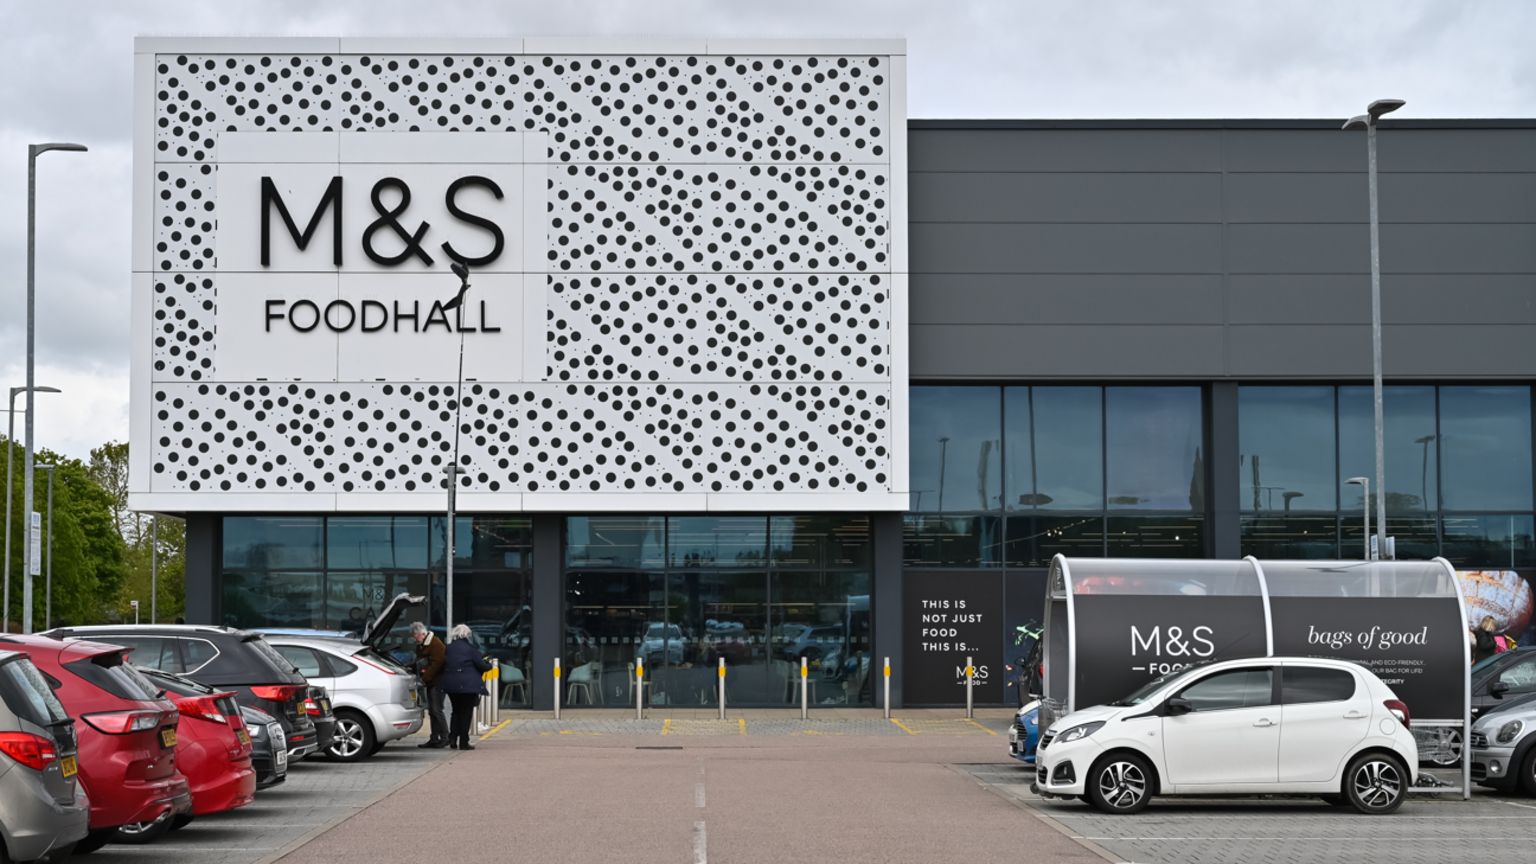 M&S foodhall in Chelmsford seen from the car park